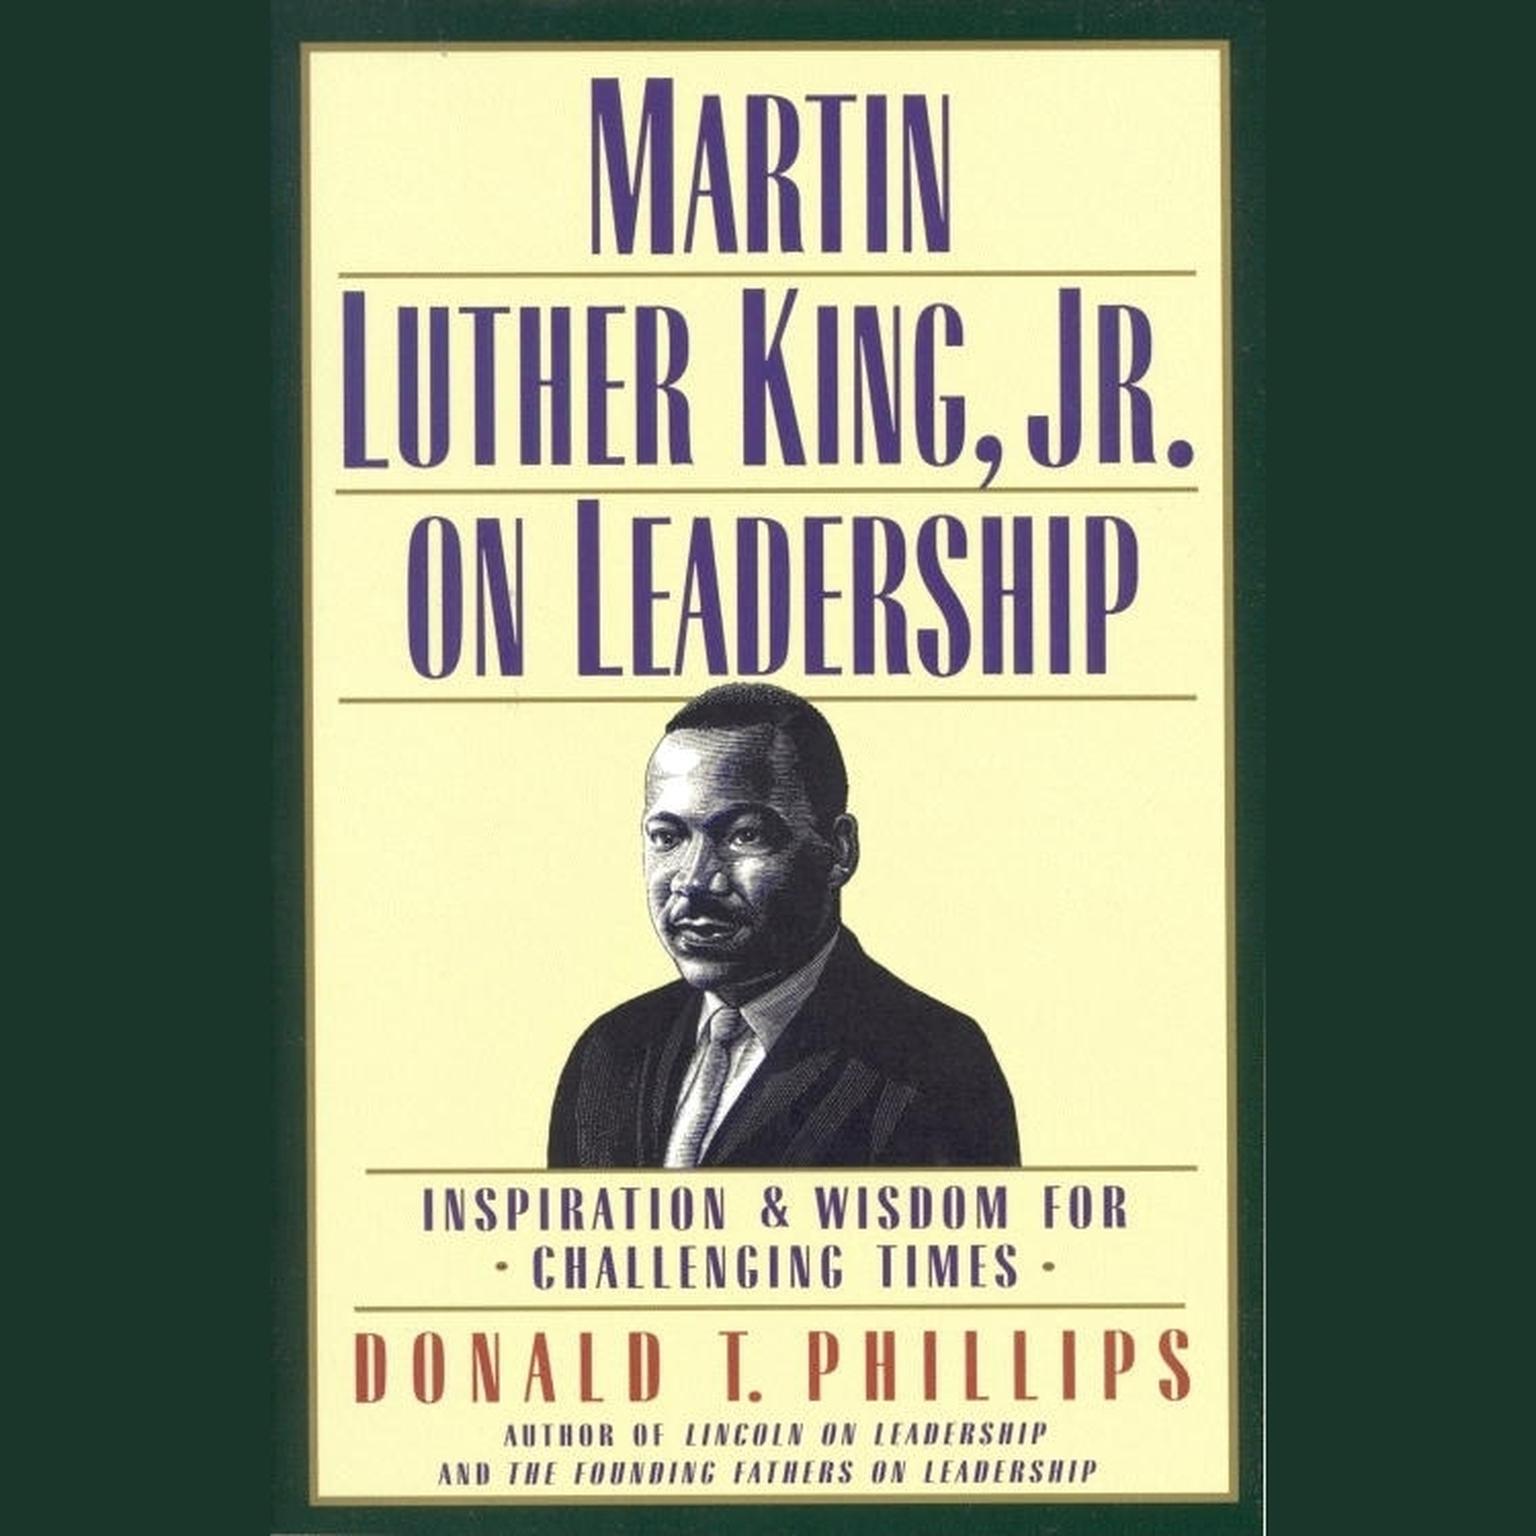 Martin Luther King, Jr., on Leadership (Abridged): Inspiration and Wisdom for Challenging Times Audiobook, by Donald T. Phillips